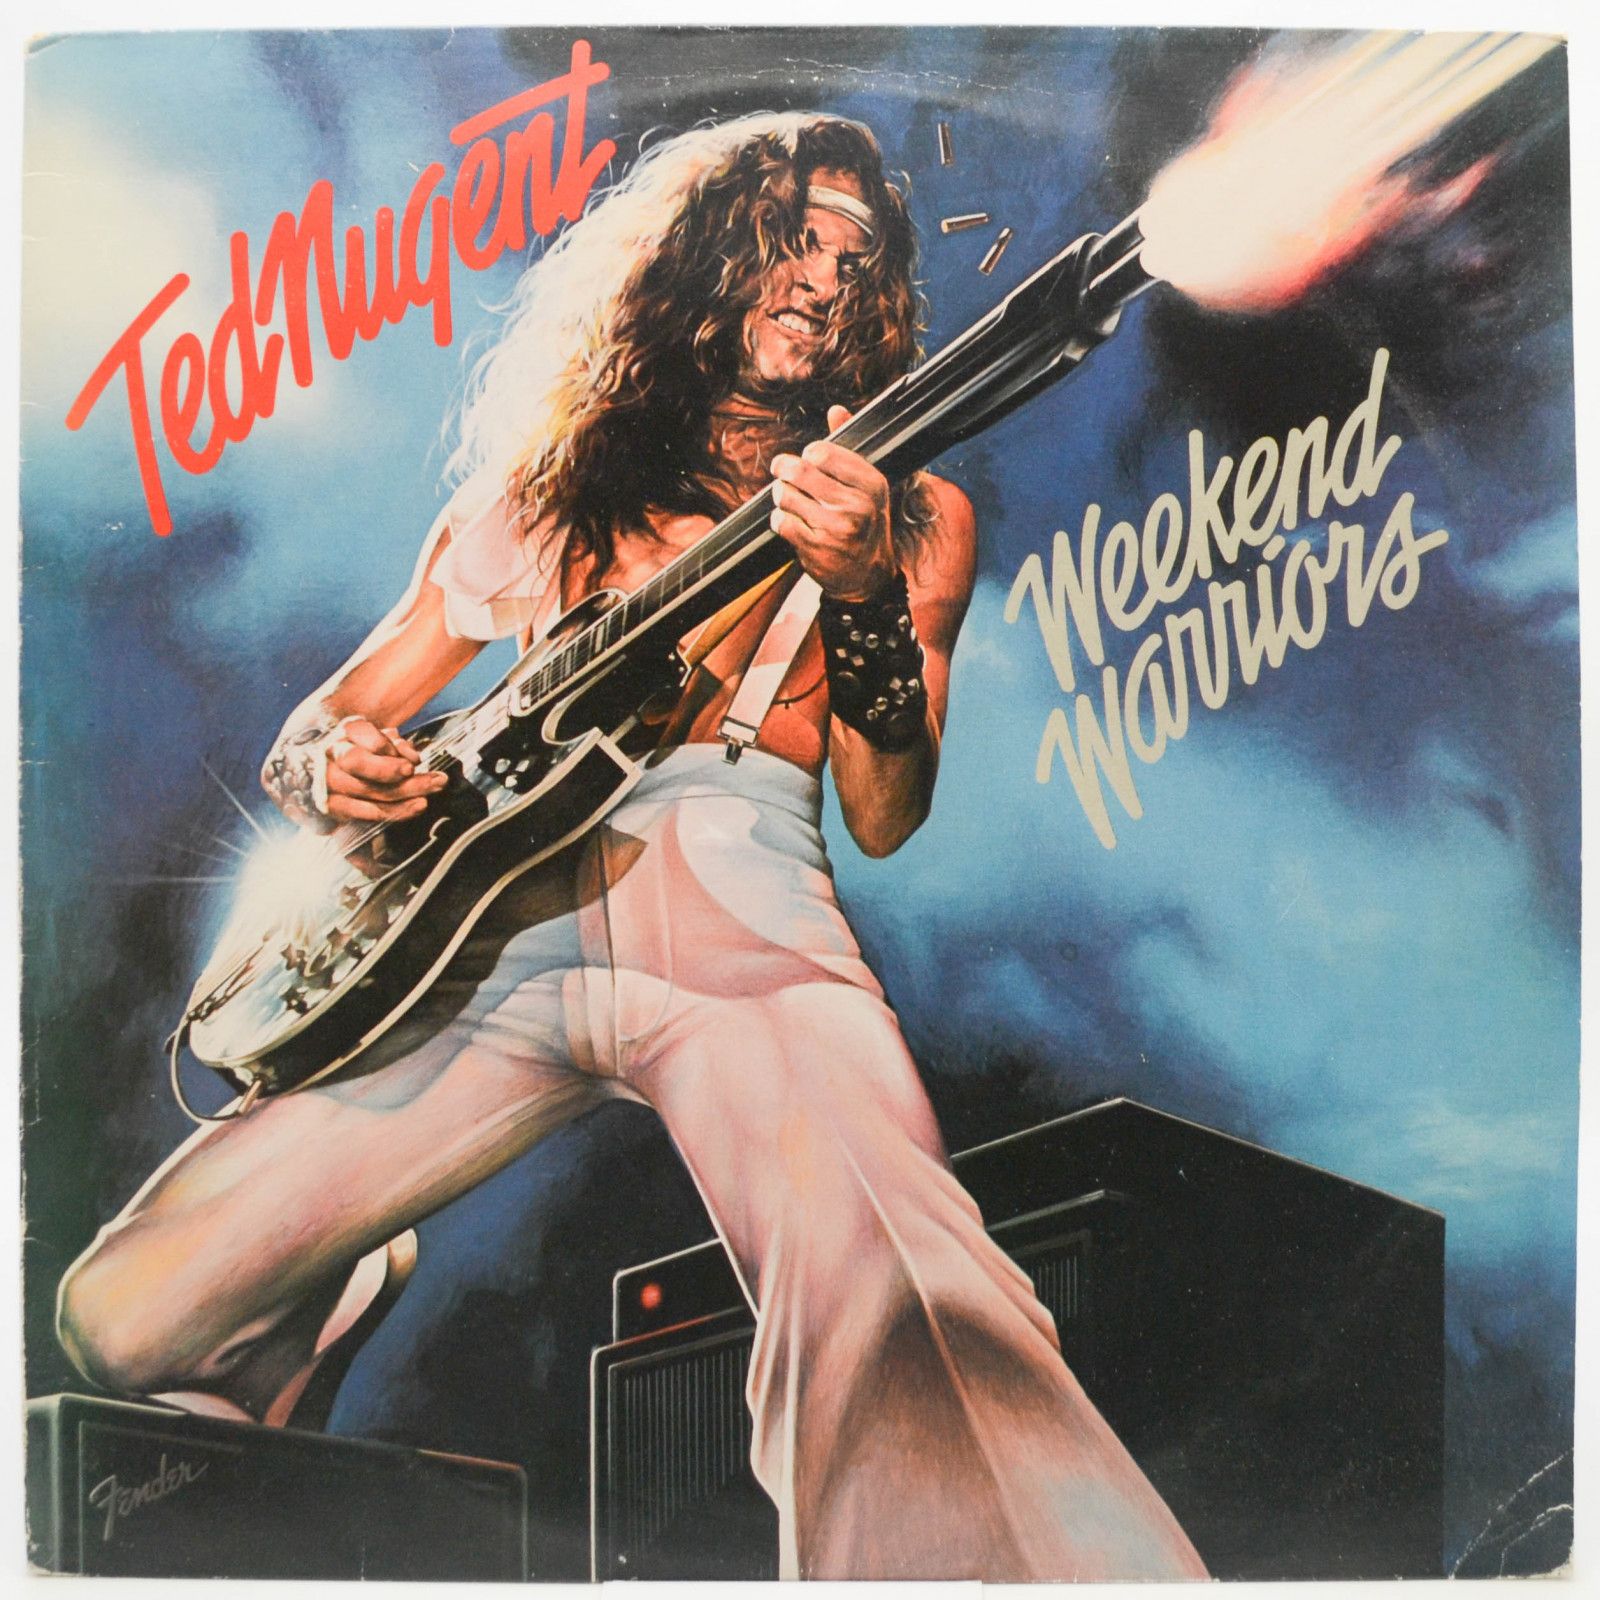 Ted Nugent — Weekend Warriors, 1978